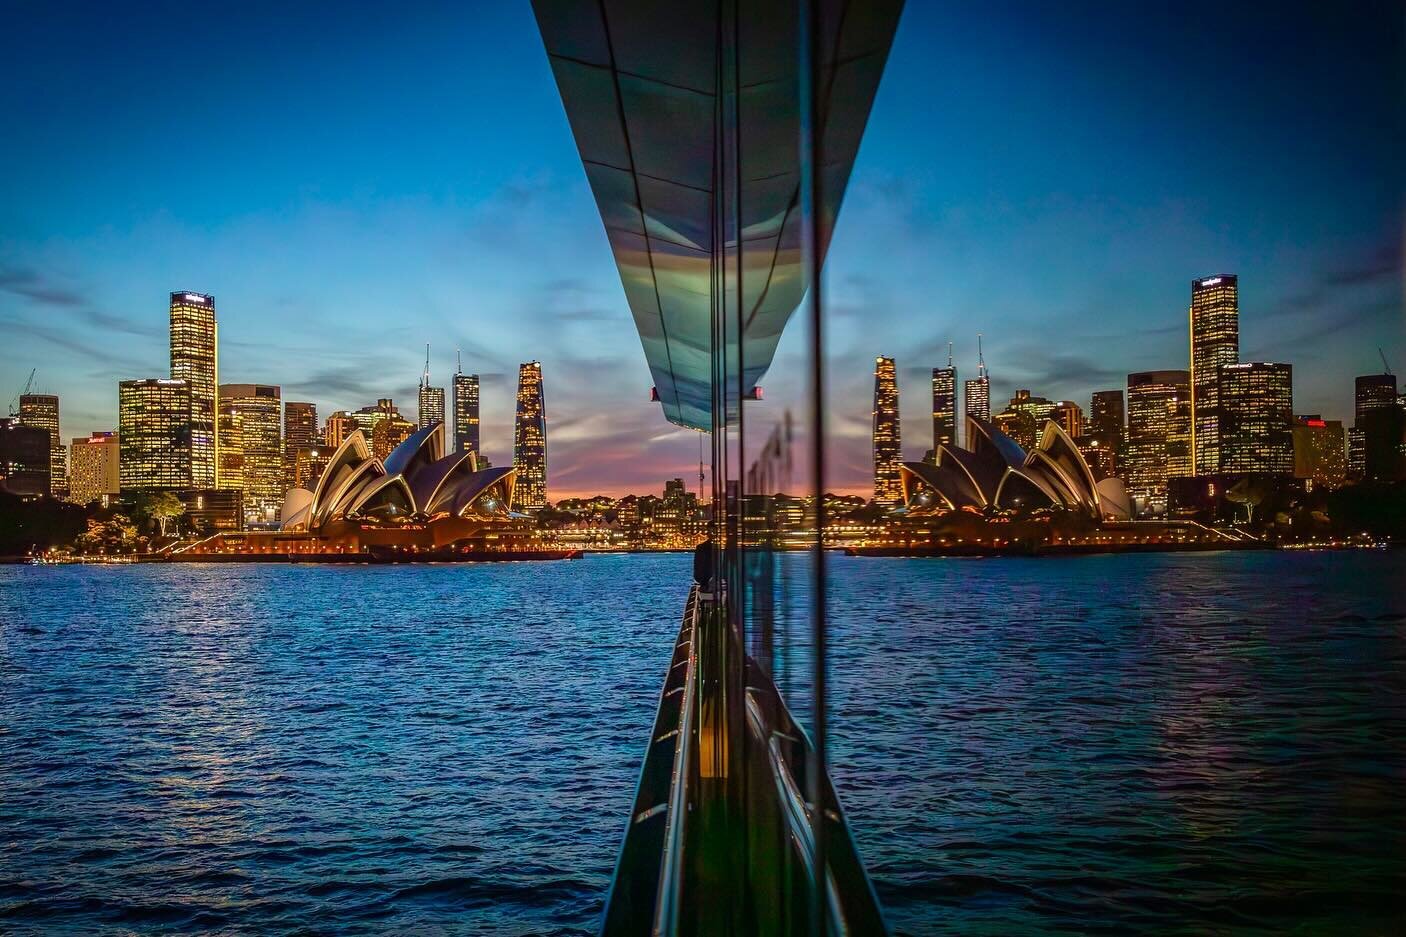 An afternoon boat cruise on the Sydney Harbour! Such a gorgeous backdrop and #venue for an international industry conference welcome reception event! 🥂☀️🛥️
#professionalphotographer&nbsp;#eventphotography #photographeratlarge #events #corporateeven